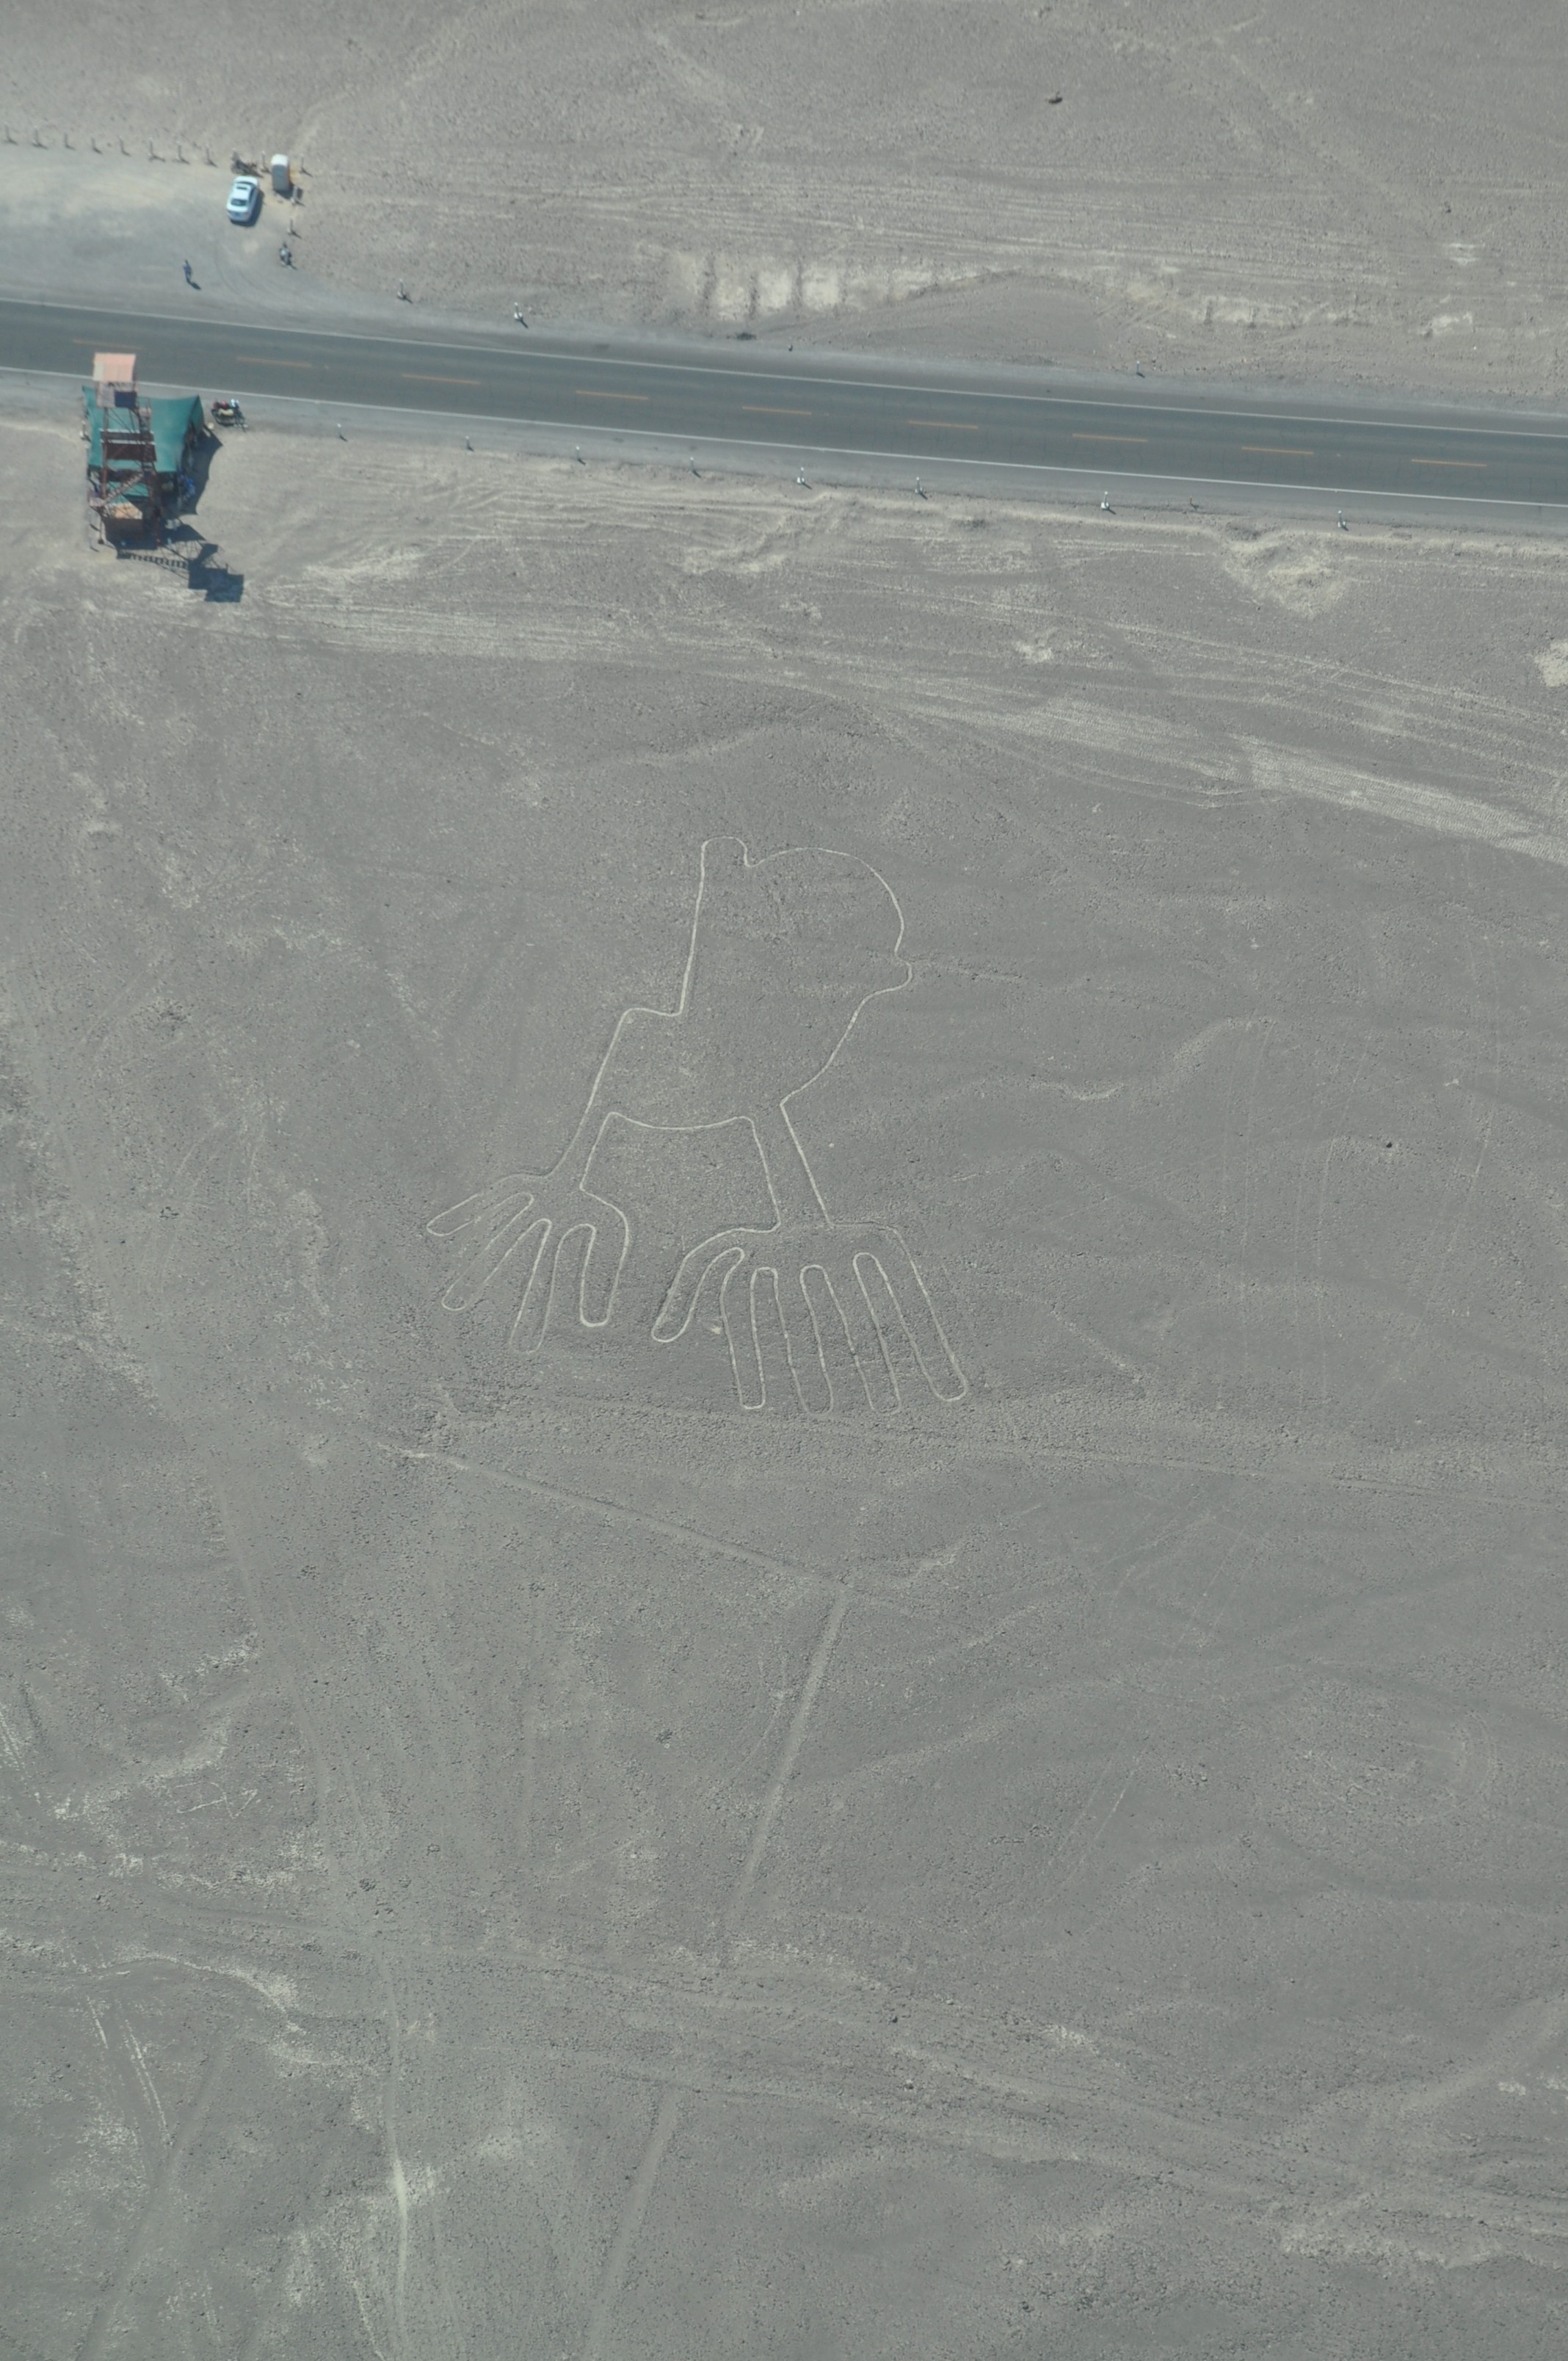 Nasca Lines: The Hands